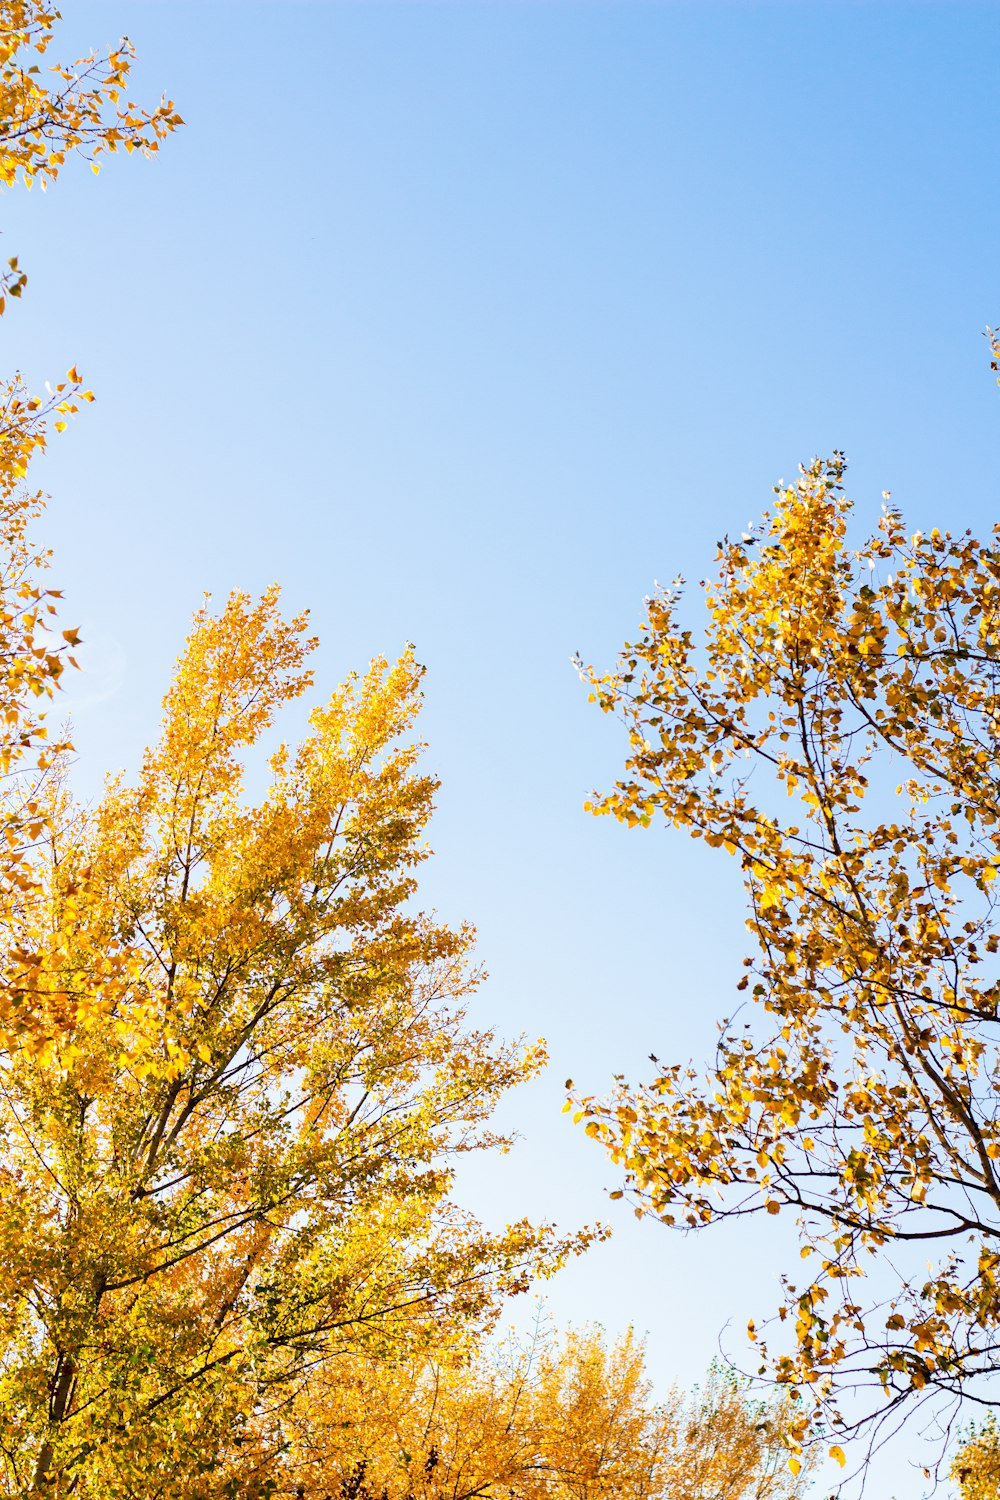 trees with yellow leaves and blue sky in the background